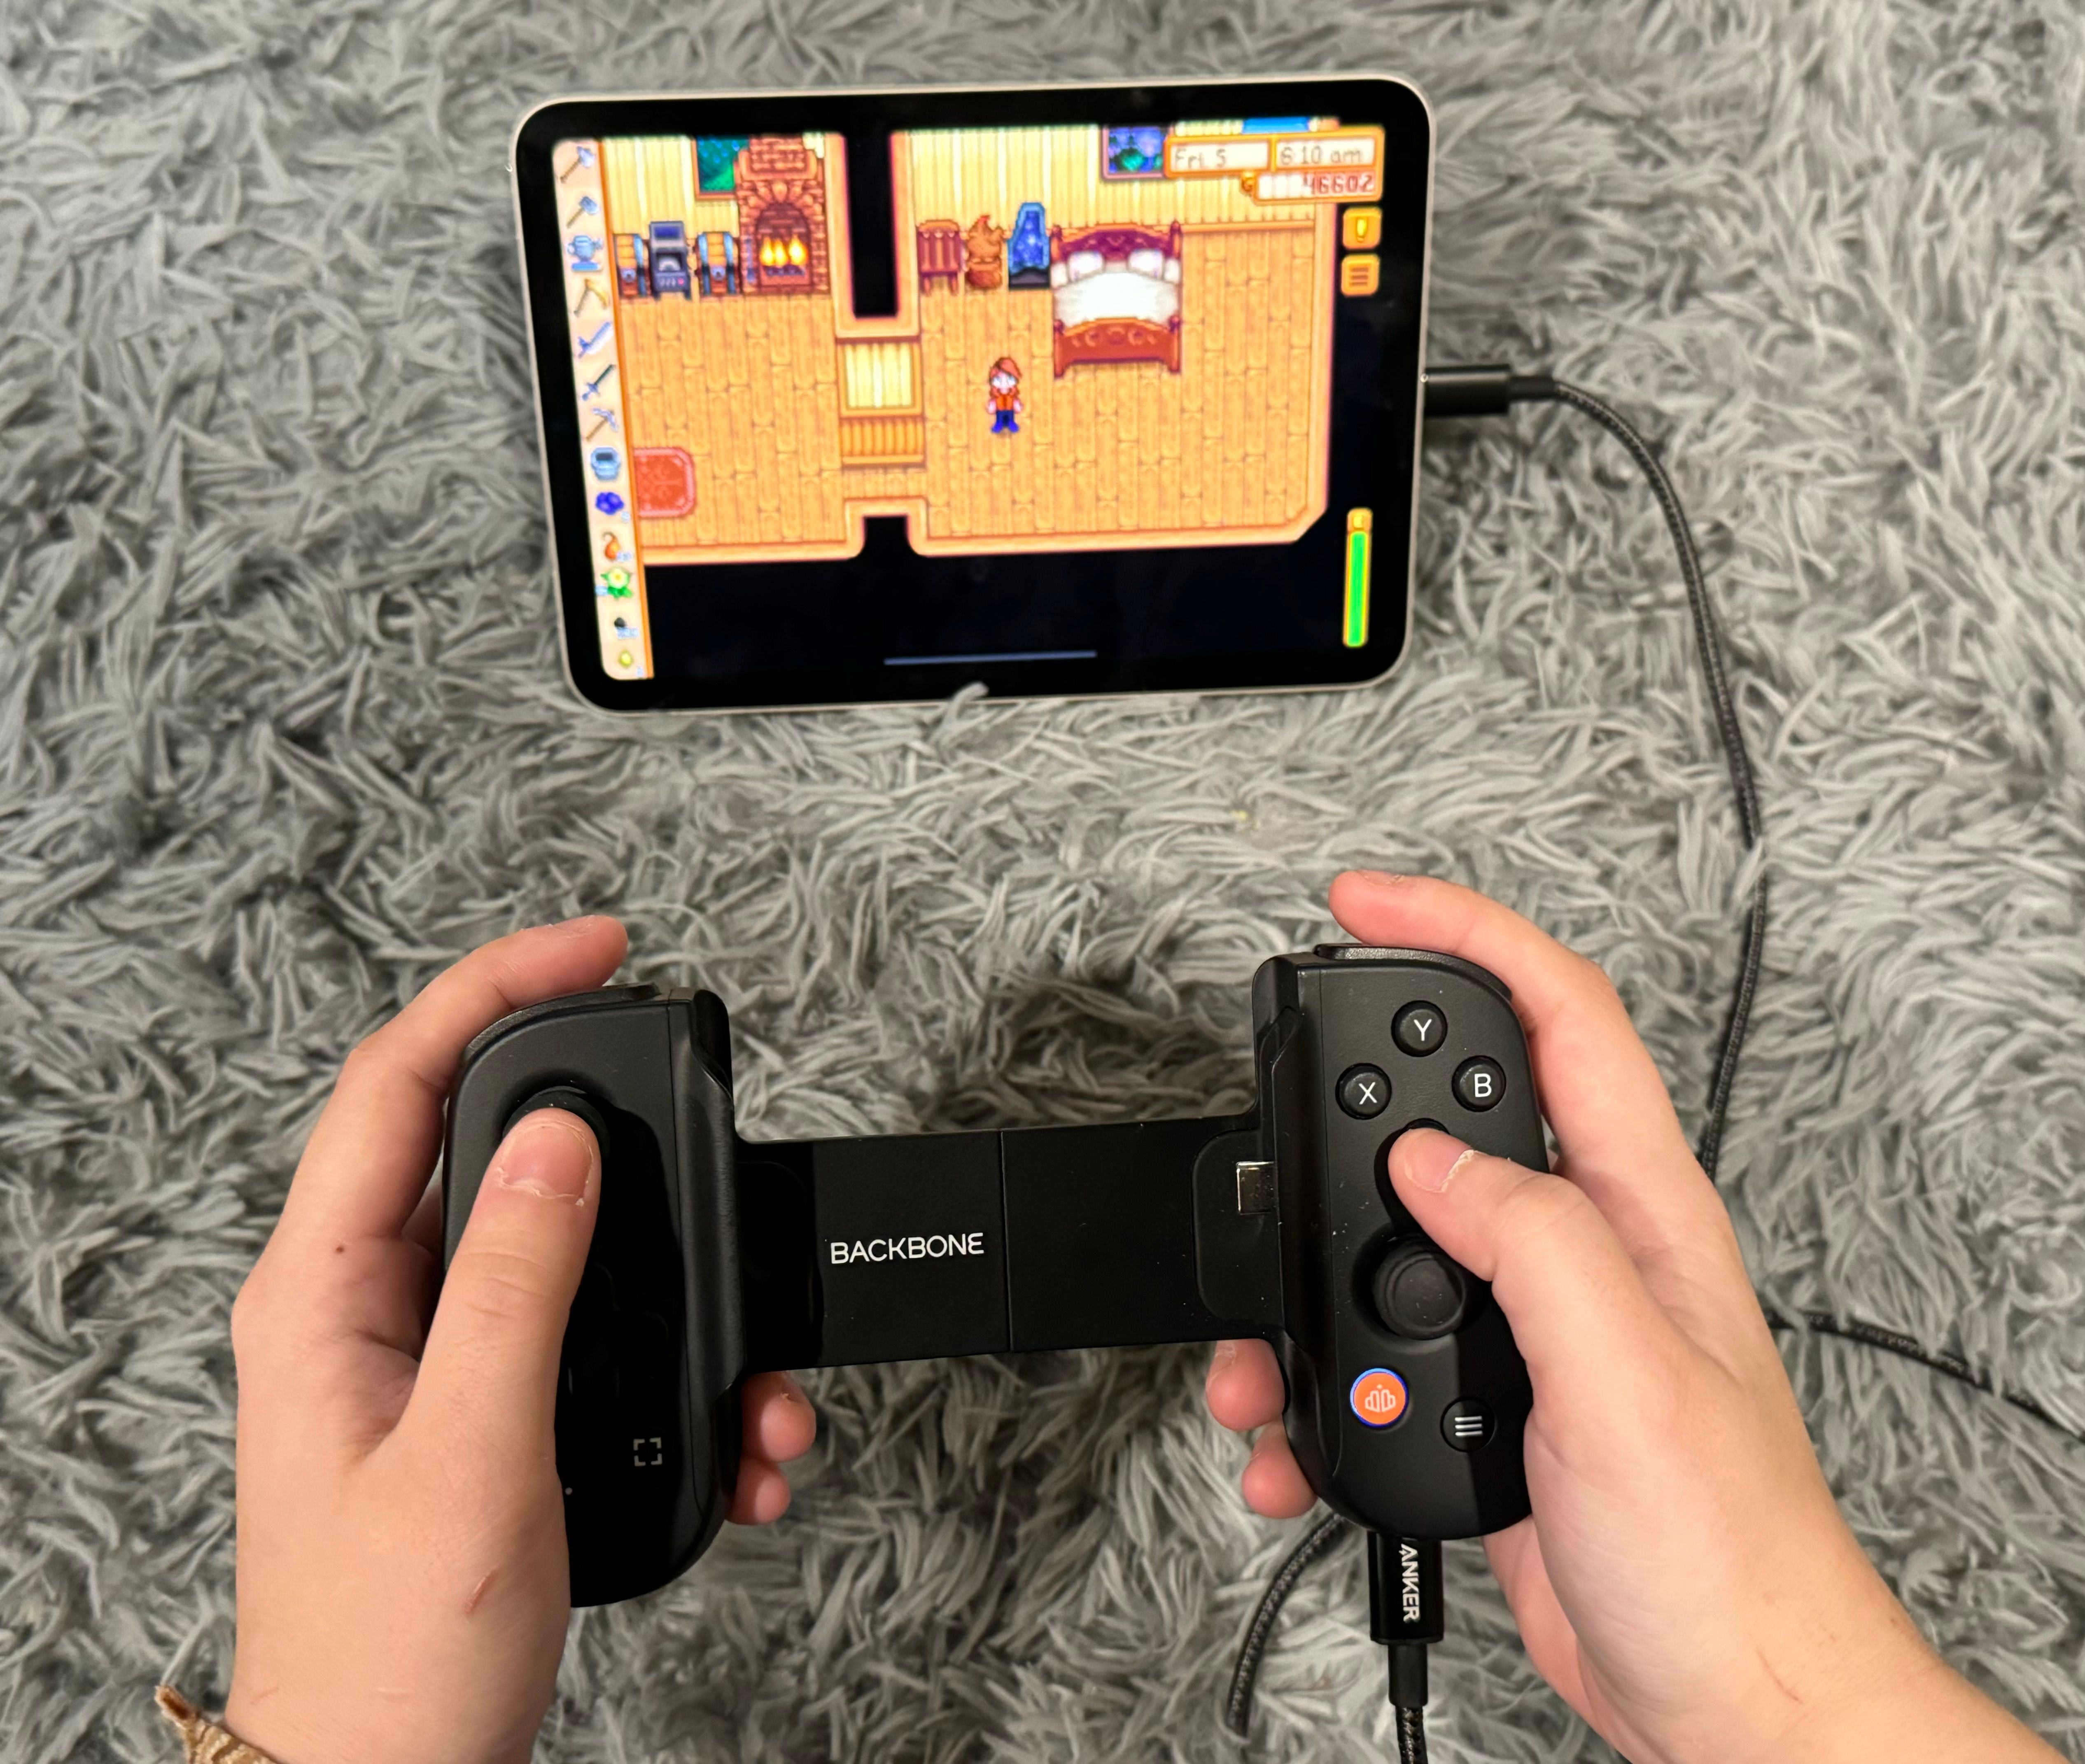 Person holding Backbone game controller connected to iPad mini, with Stardew Valley playing on screen.